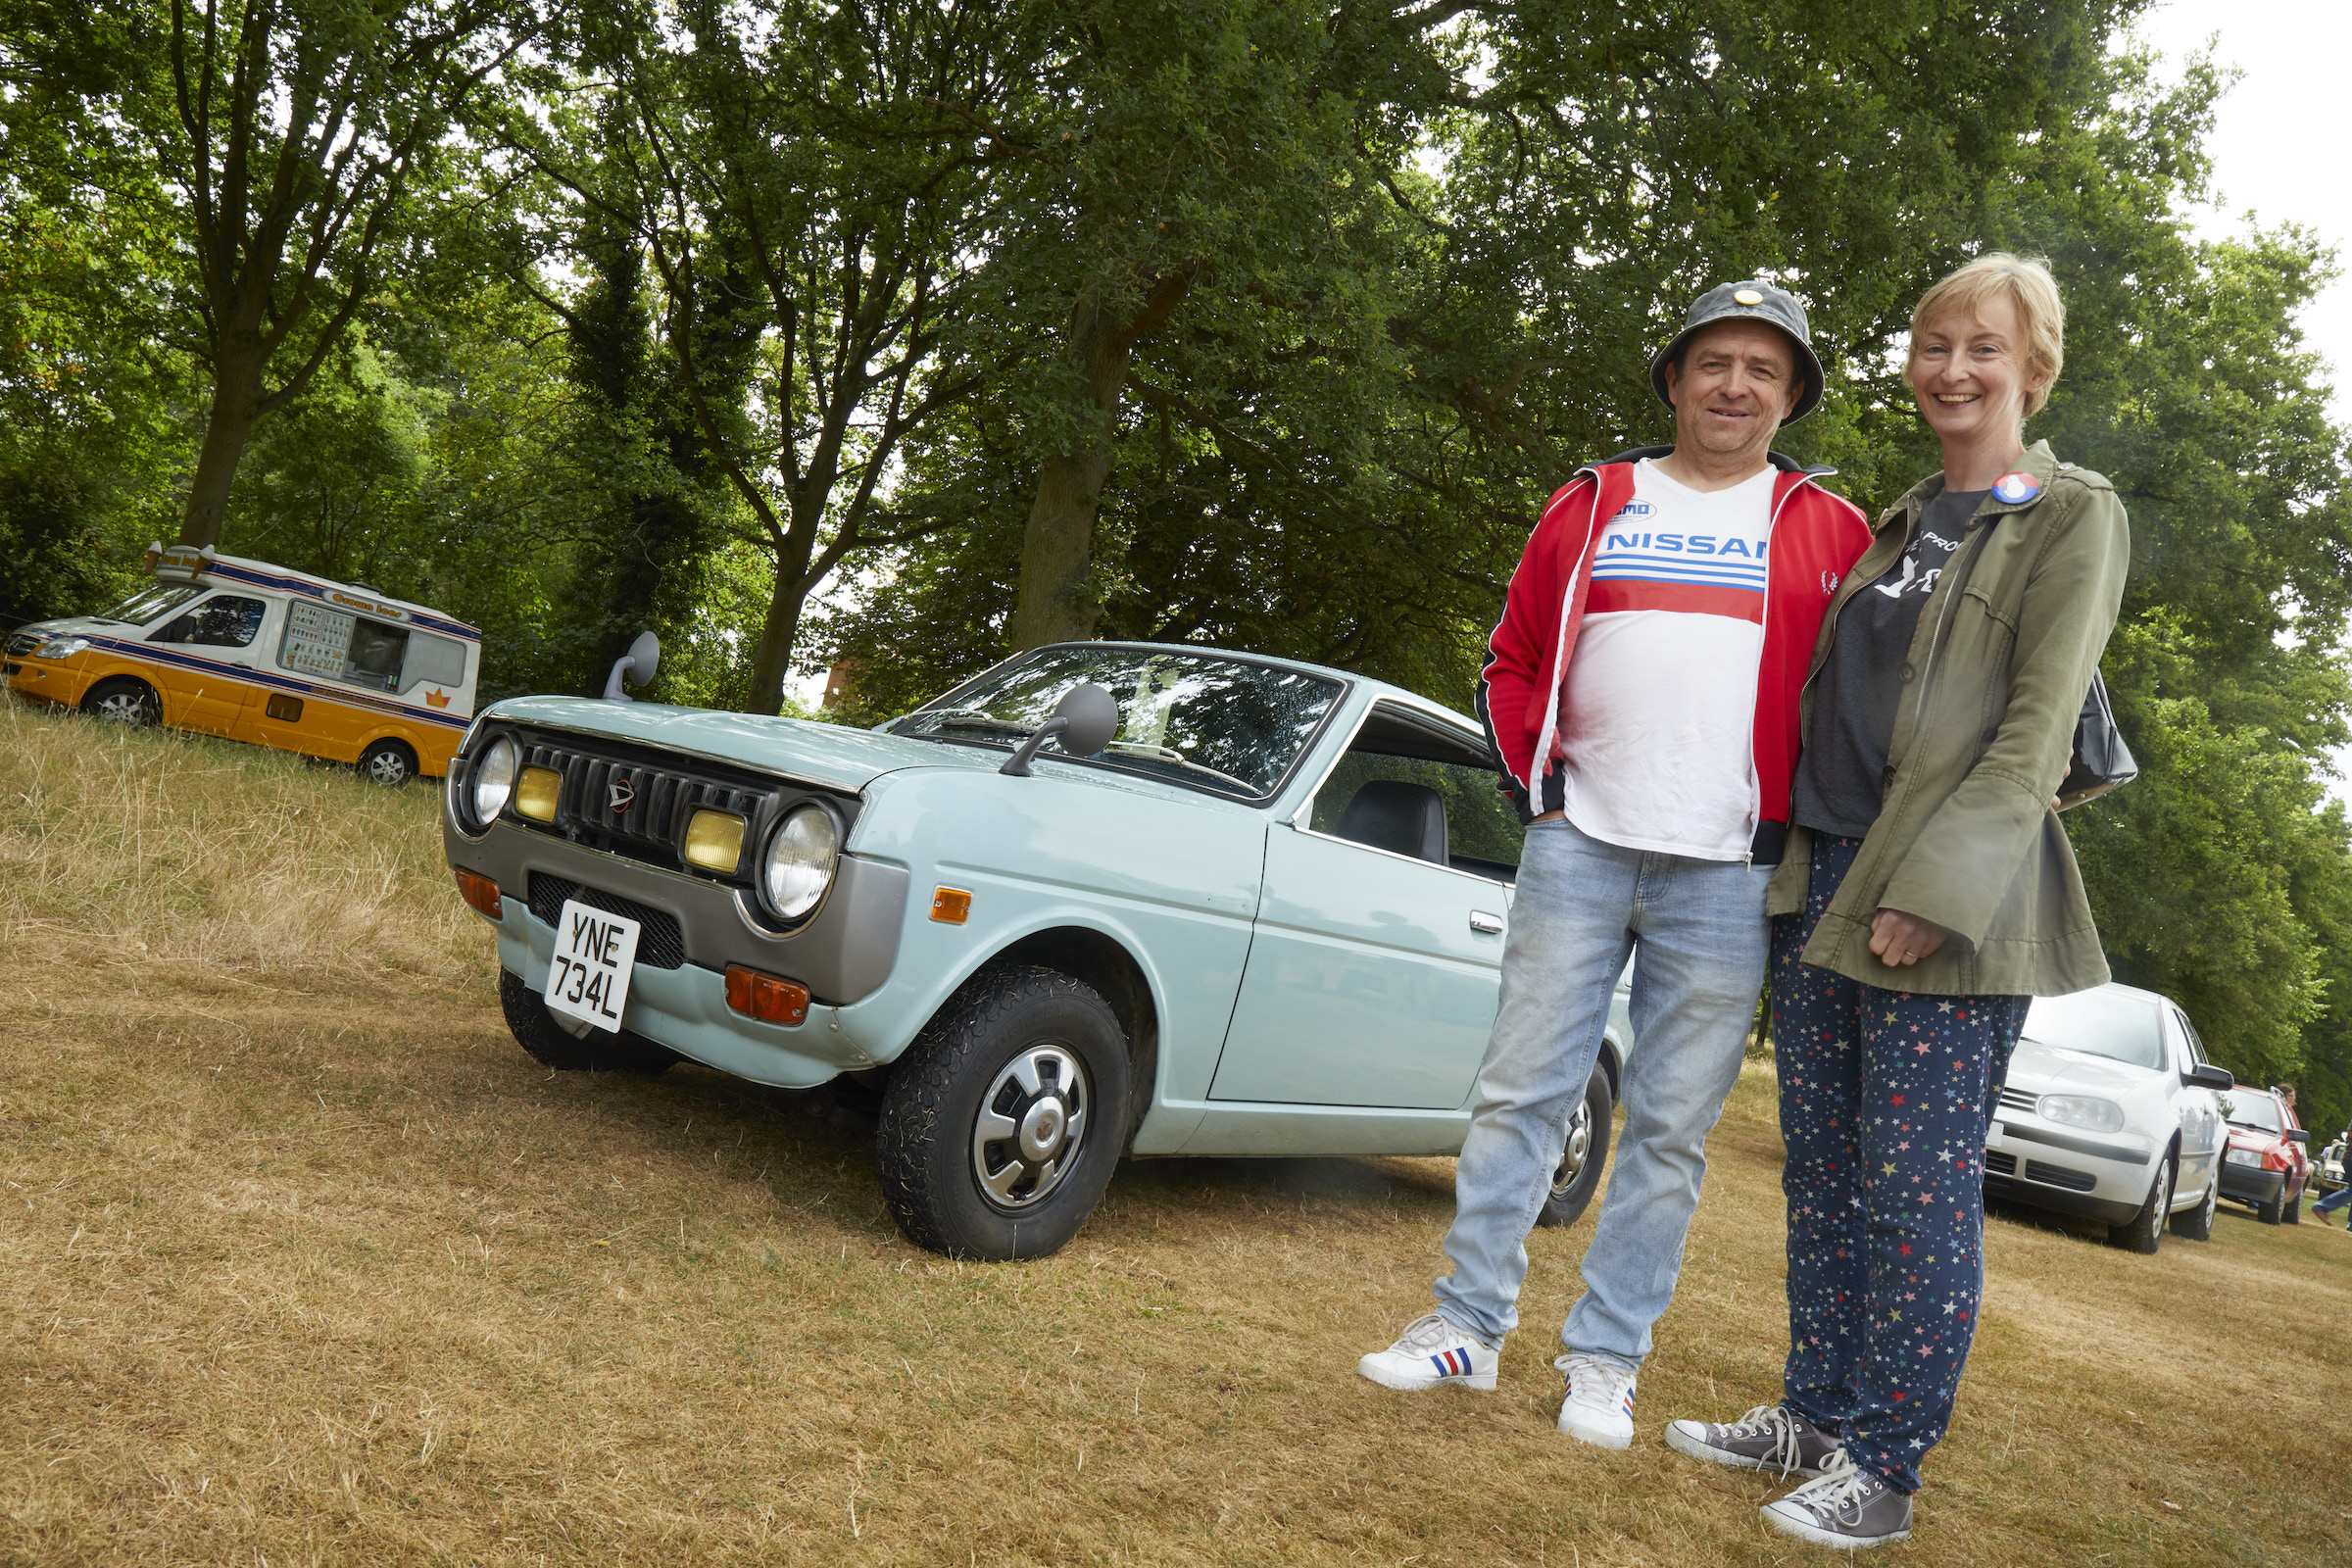 Your Classics: Eddie Rattley's Daihatsu Fellow Max is a tiny two-stroke